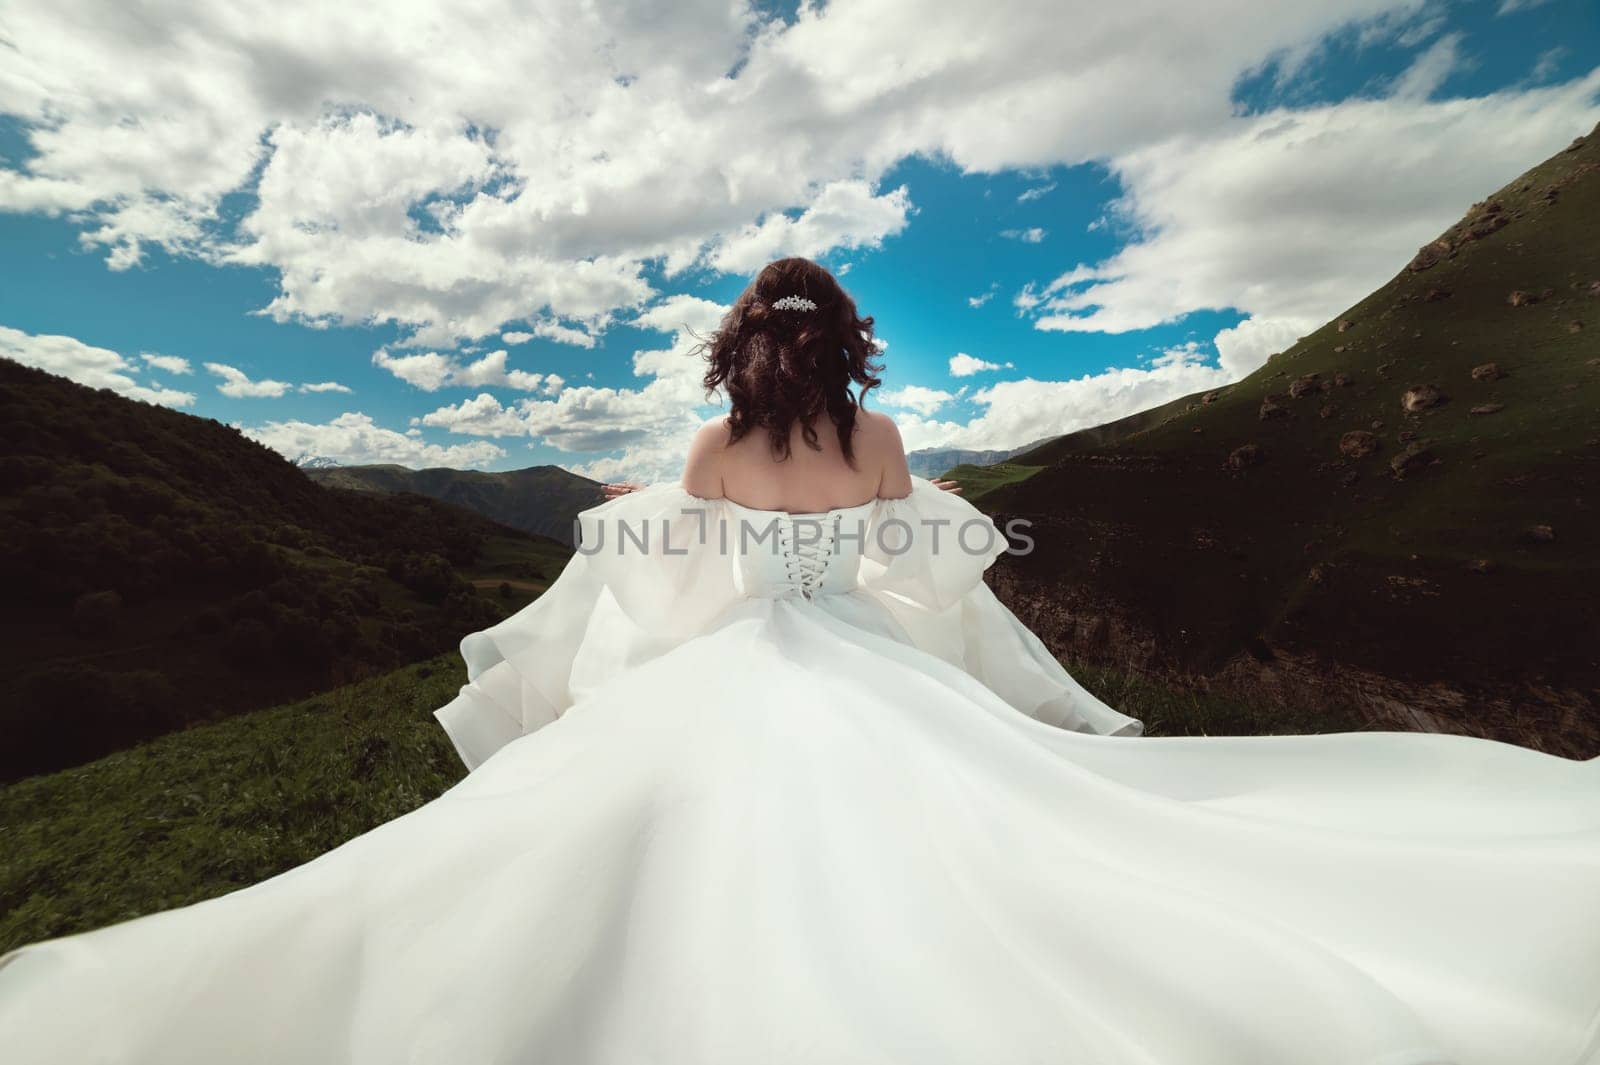 A girl in a white dress with a long flying train runs across a field in the green mountains on a sunny day